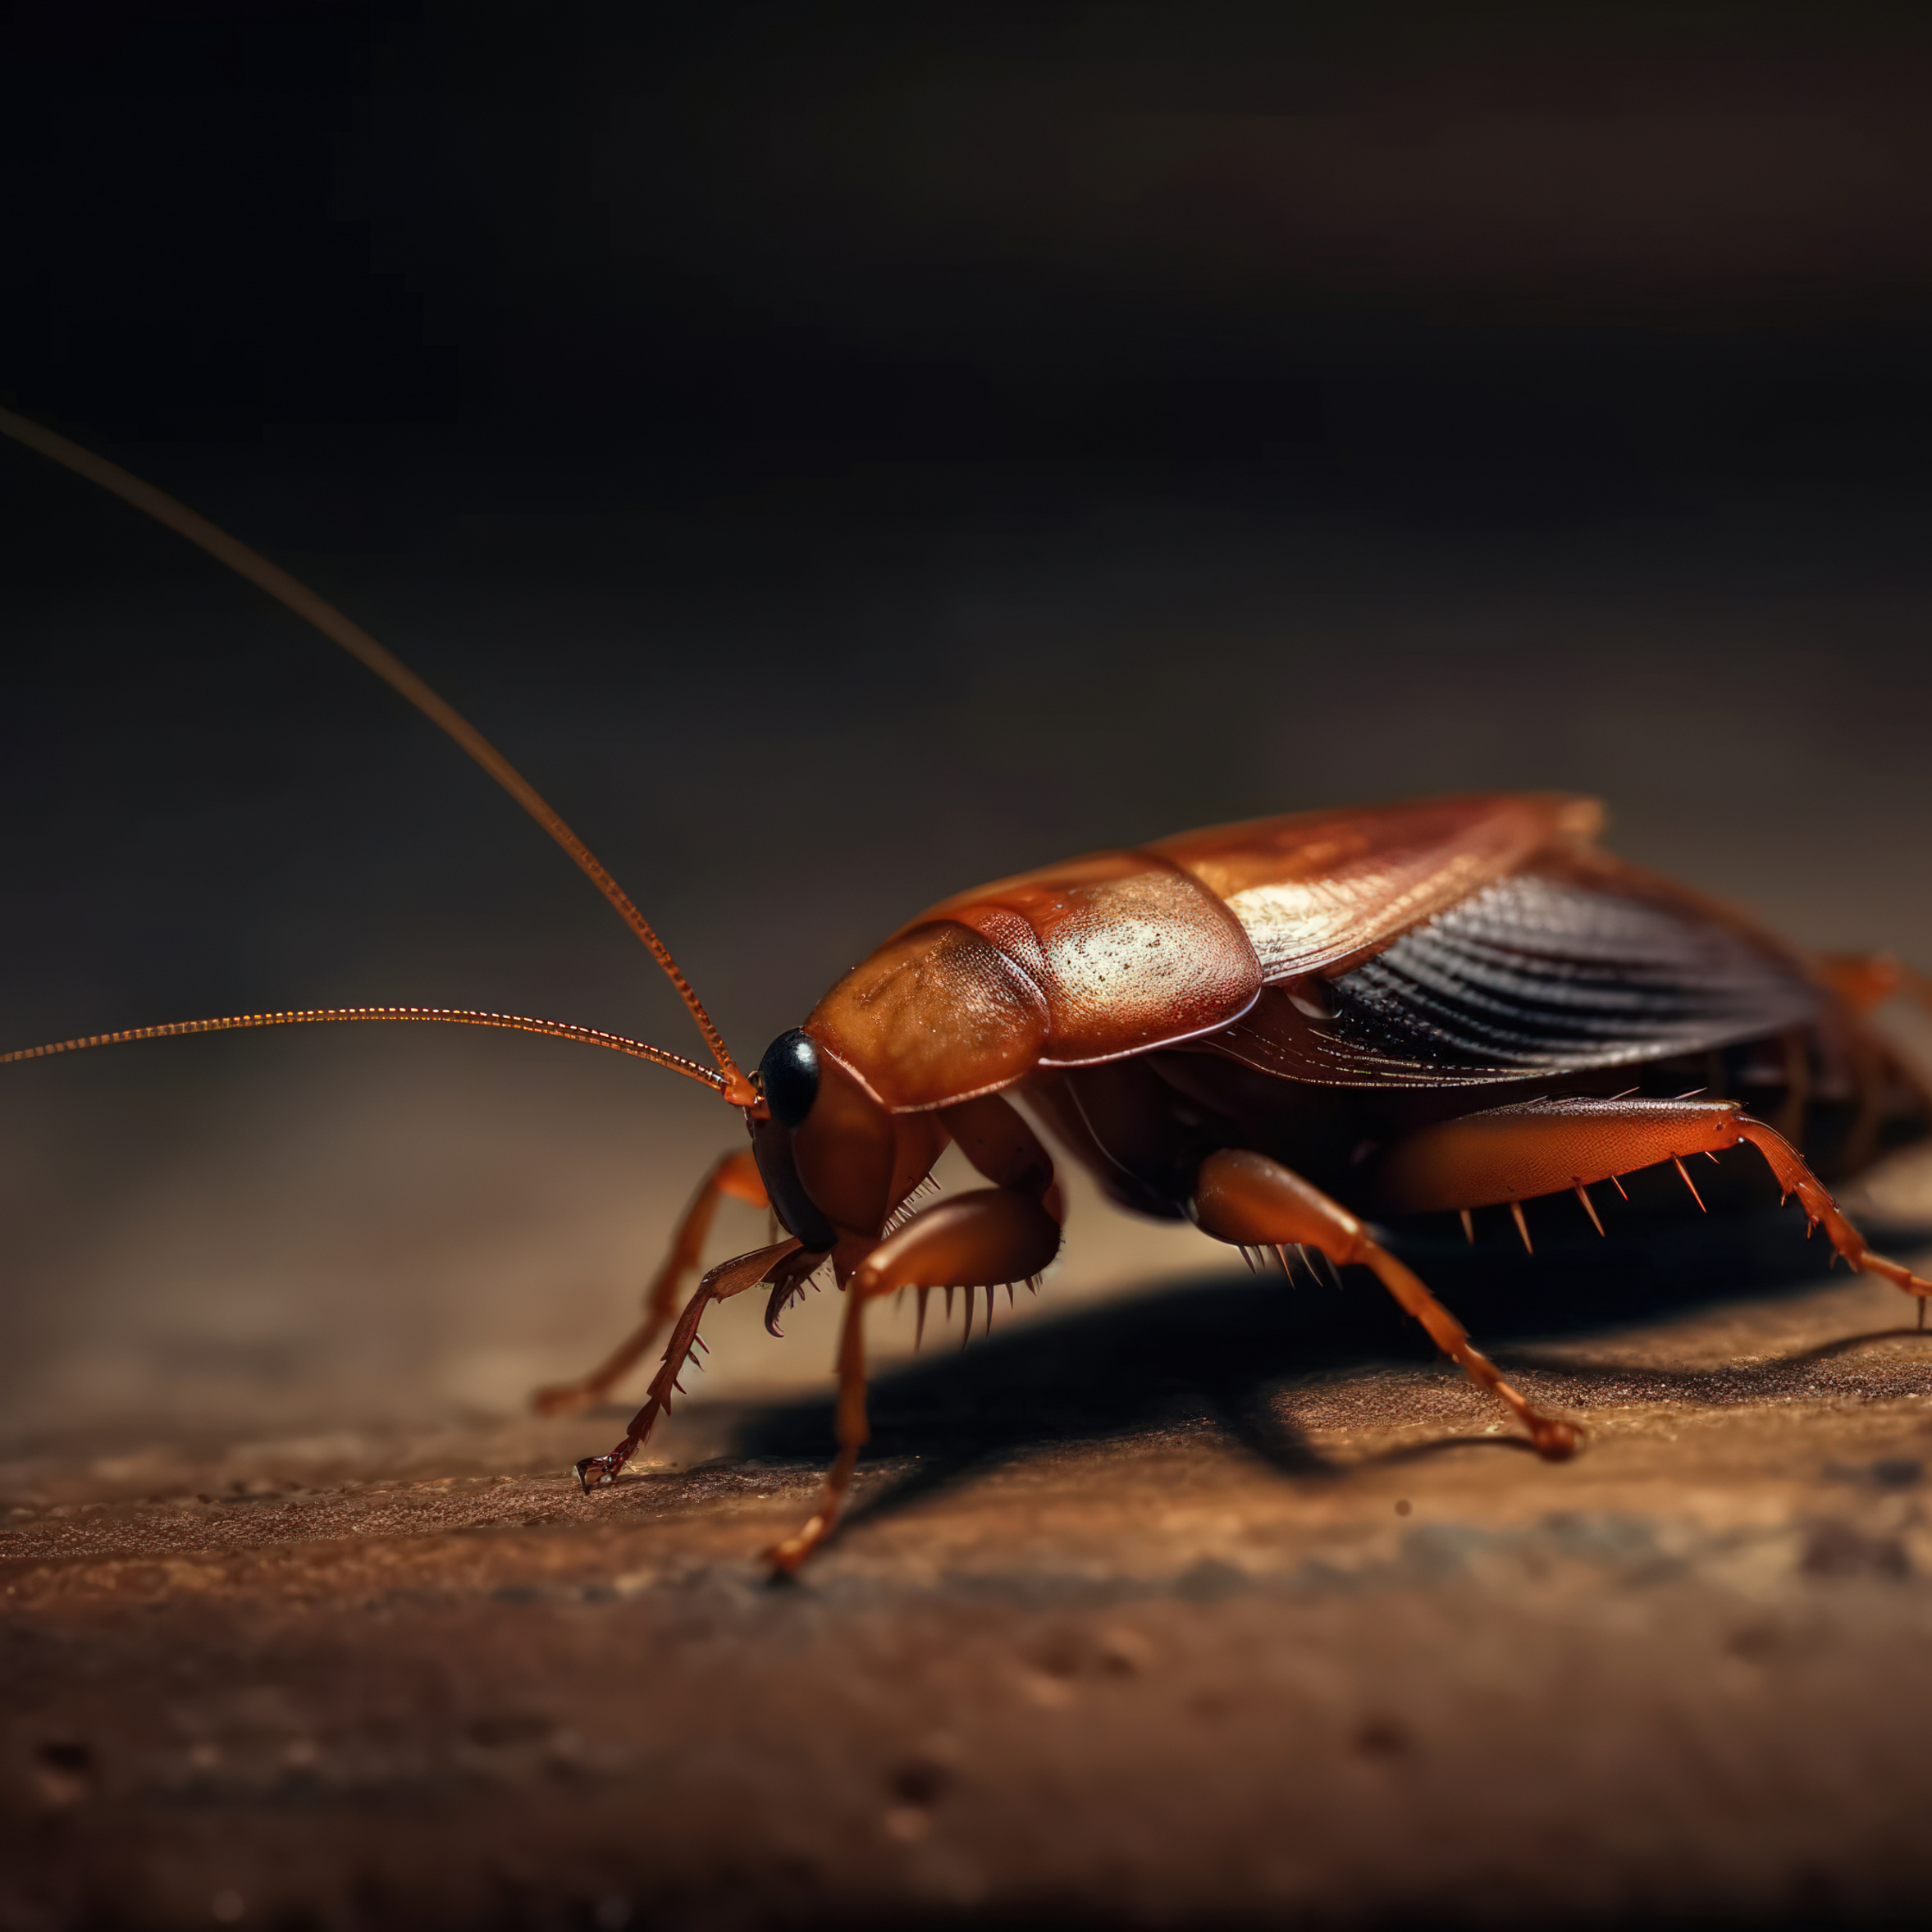 A cockroach crawling in a home - call Thorn to hire a cockroach exterminator!